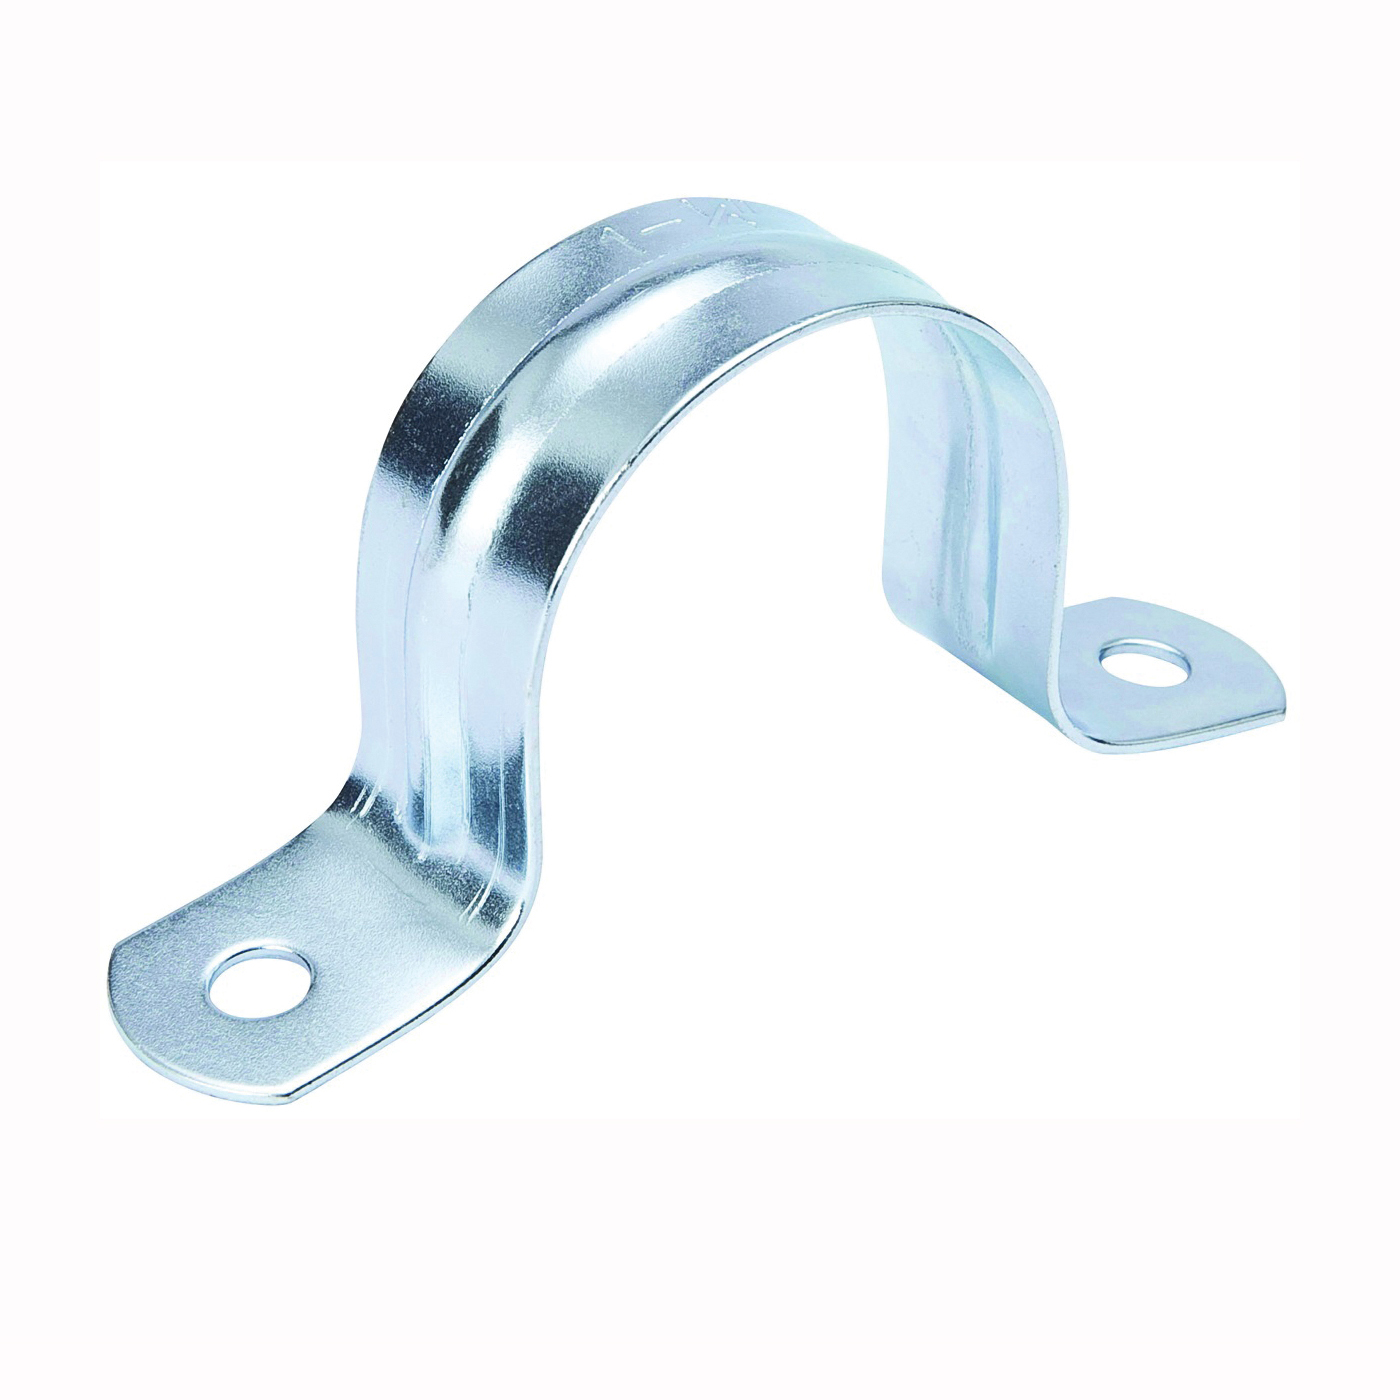 G13-125HC Pipe Strap, 1-1/4 in Opening, Steel